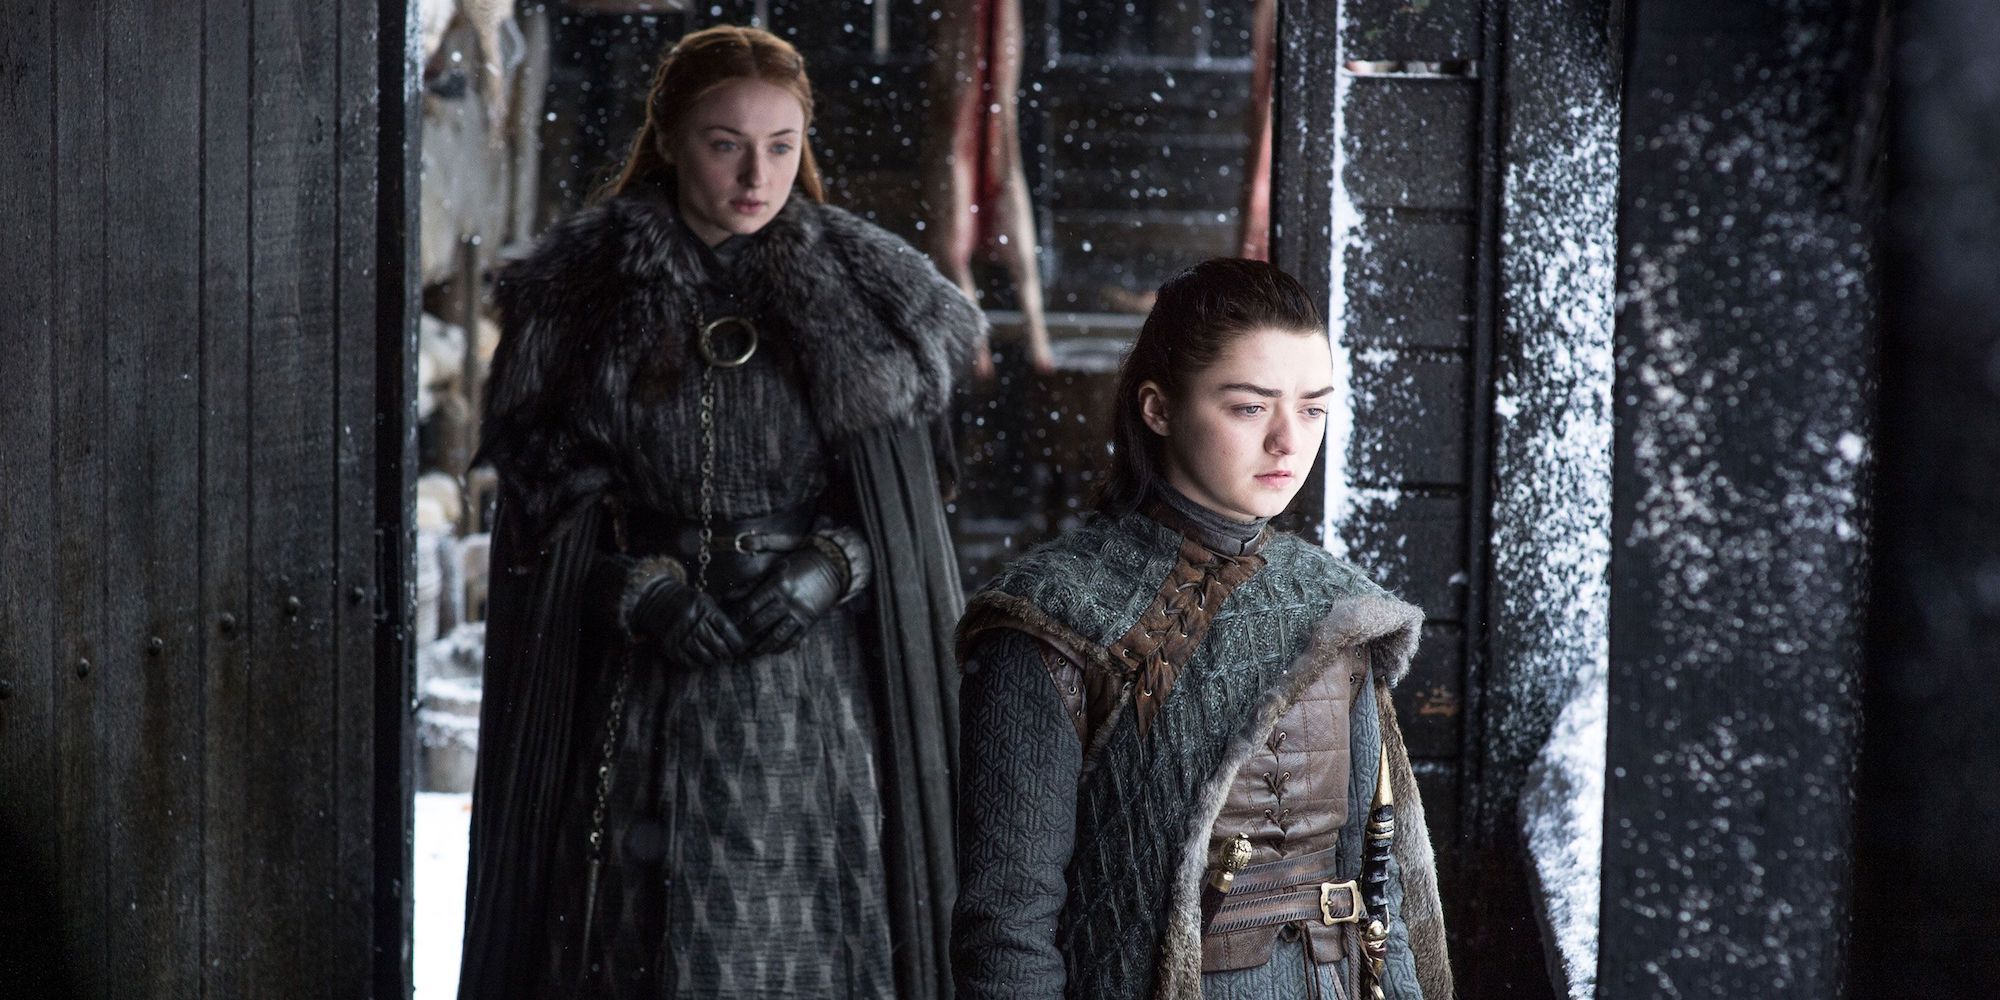 Sansa and Arya at Winterfell in Game of Thrones.